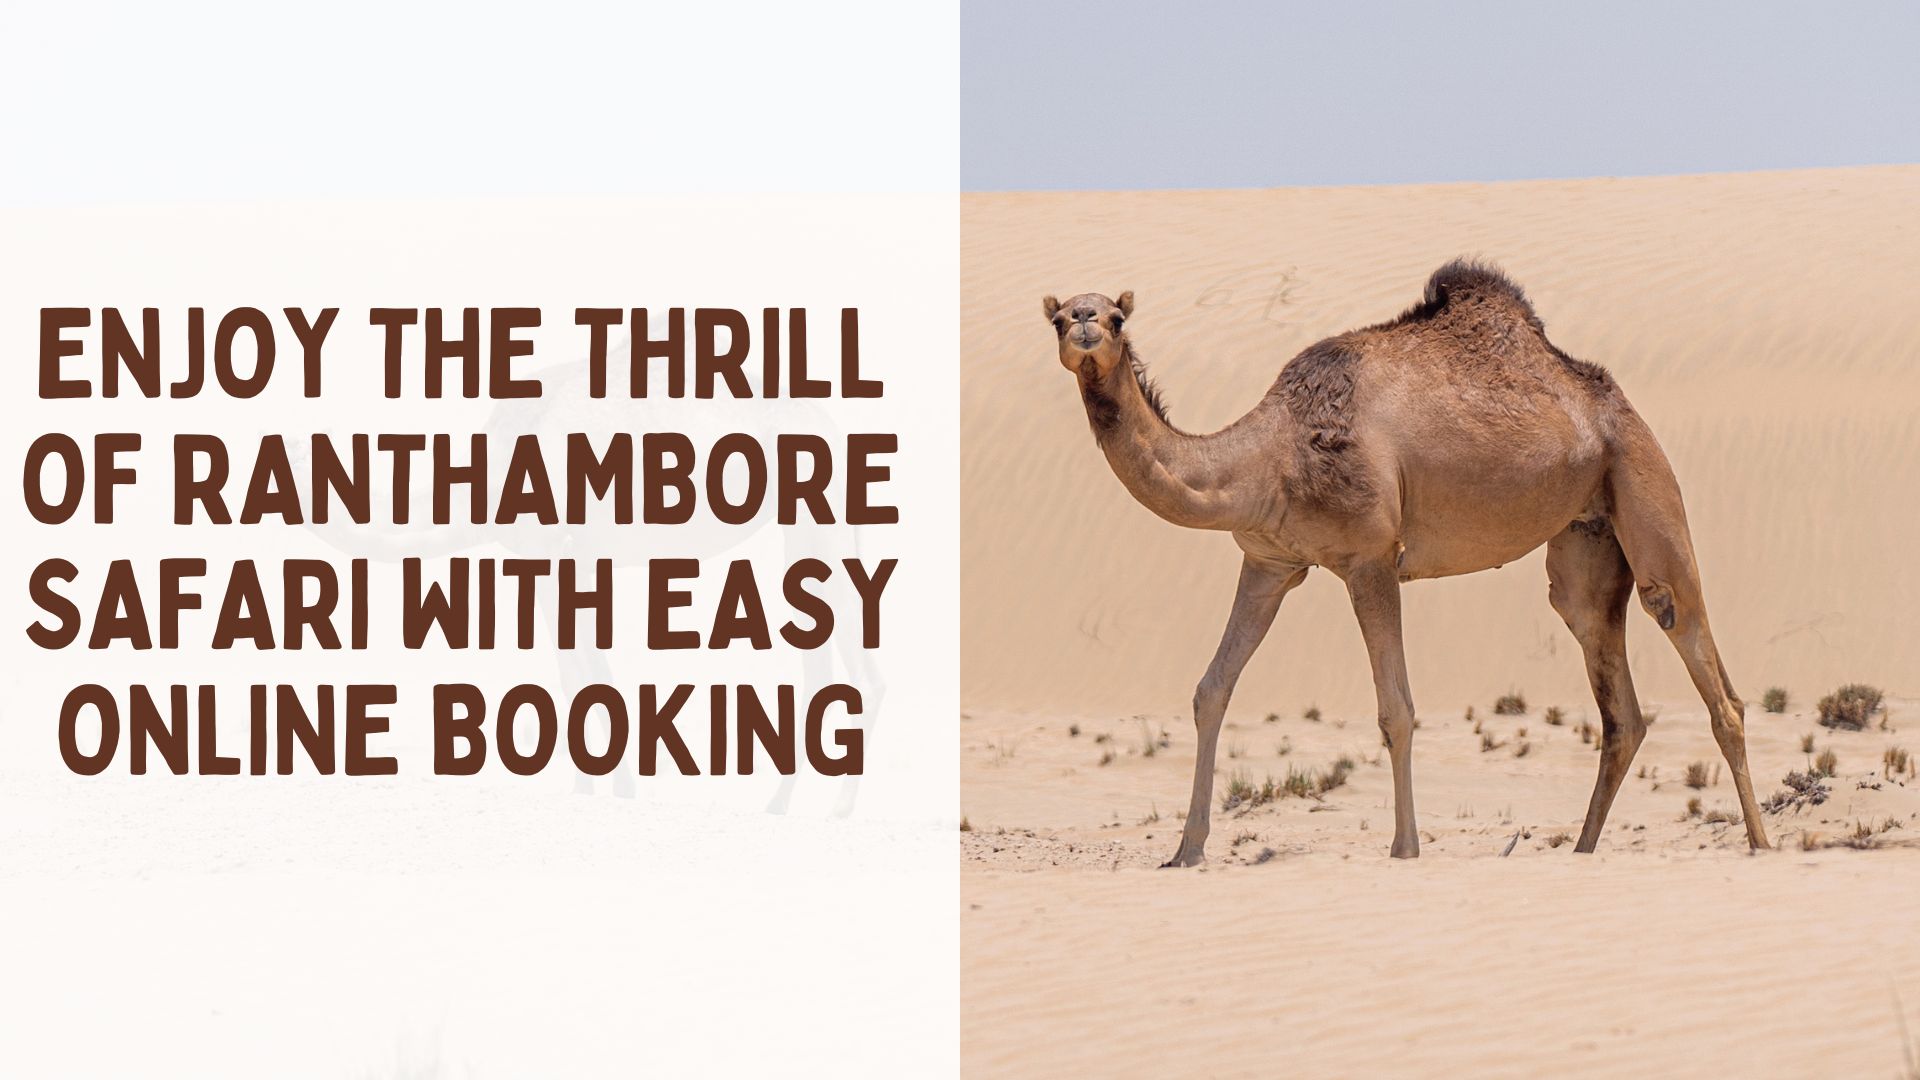 Enjoy the Thrill of Ranthambore Safari with Easy Online Booking